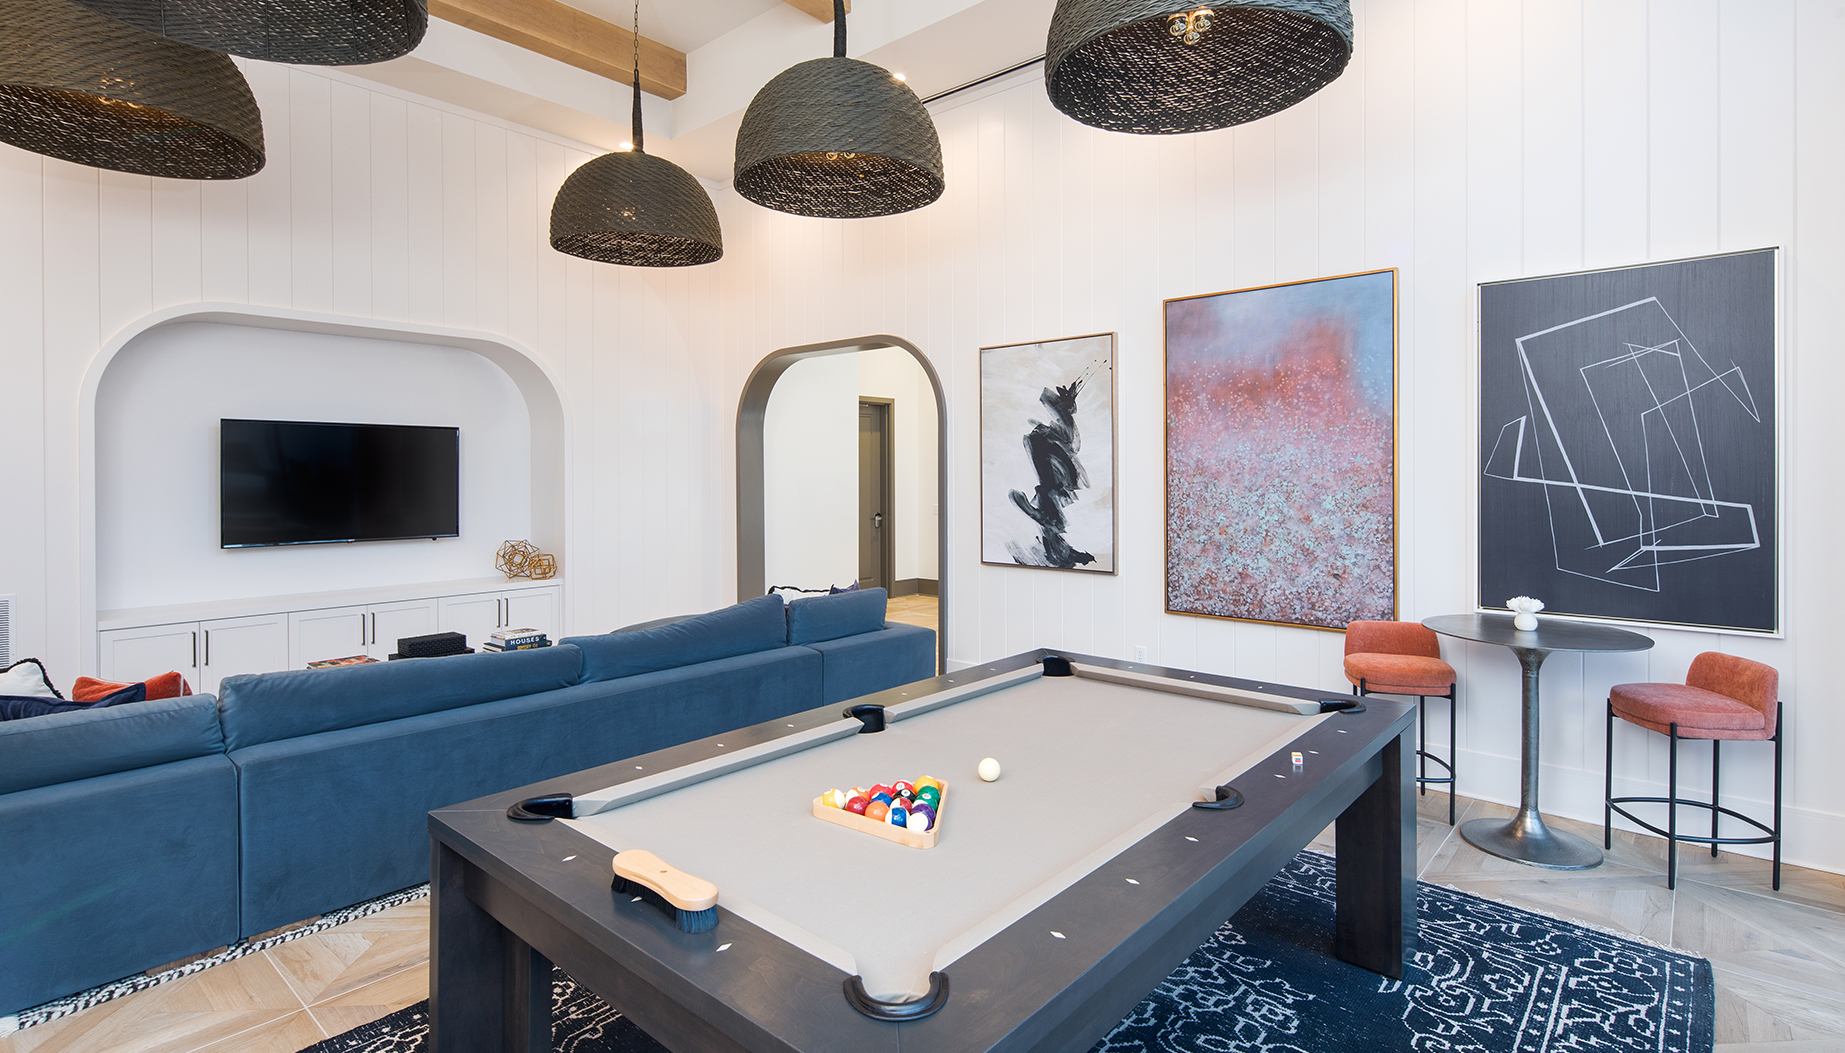 Vine North Hills clubroom with pool table and large blue couch